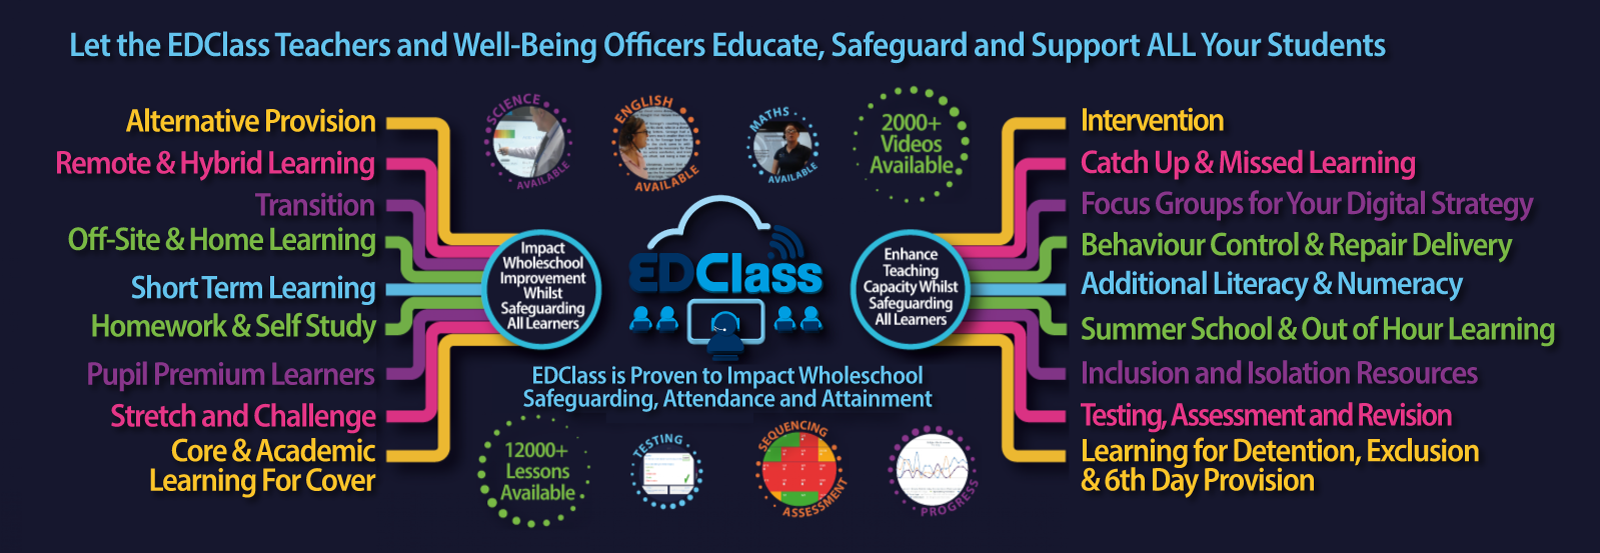 Let the EDClass Teachers and Well-Being Officers Educate, Safeguard and Support ALL your students. EDClass can help your school with alternative provision, remote and hybrid learning, transition, off-site and home learning, short term learning, homework and self study, pupil premium learners, stretch and challenge, core and academic learning for cover. 